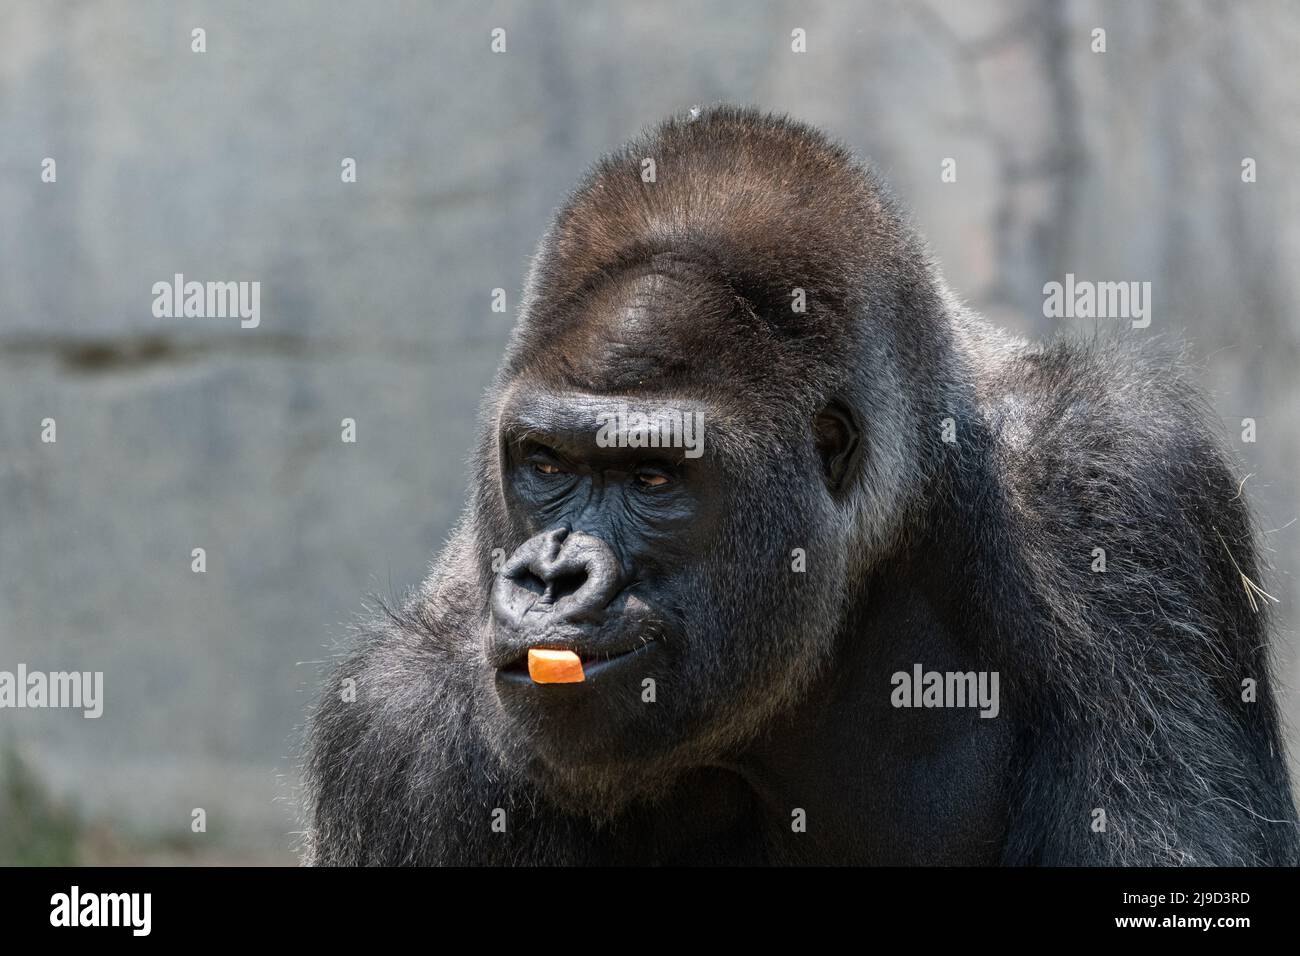 A large, intimidating, silver back Gorilla looking intently off to the side while chewing on a piece of a carrot in its mouth. Stock Photo